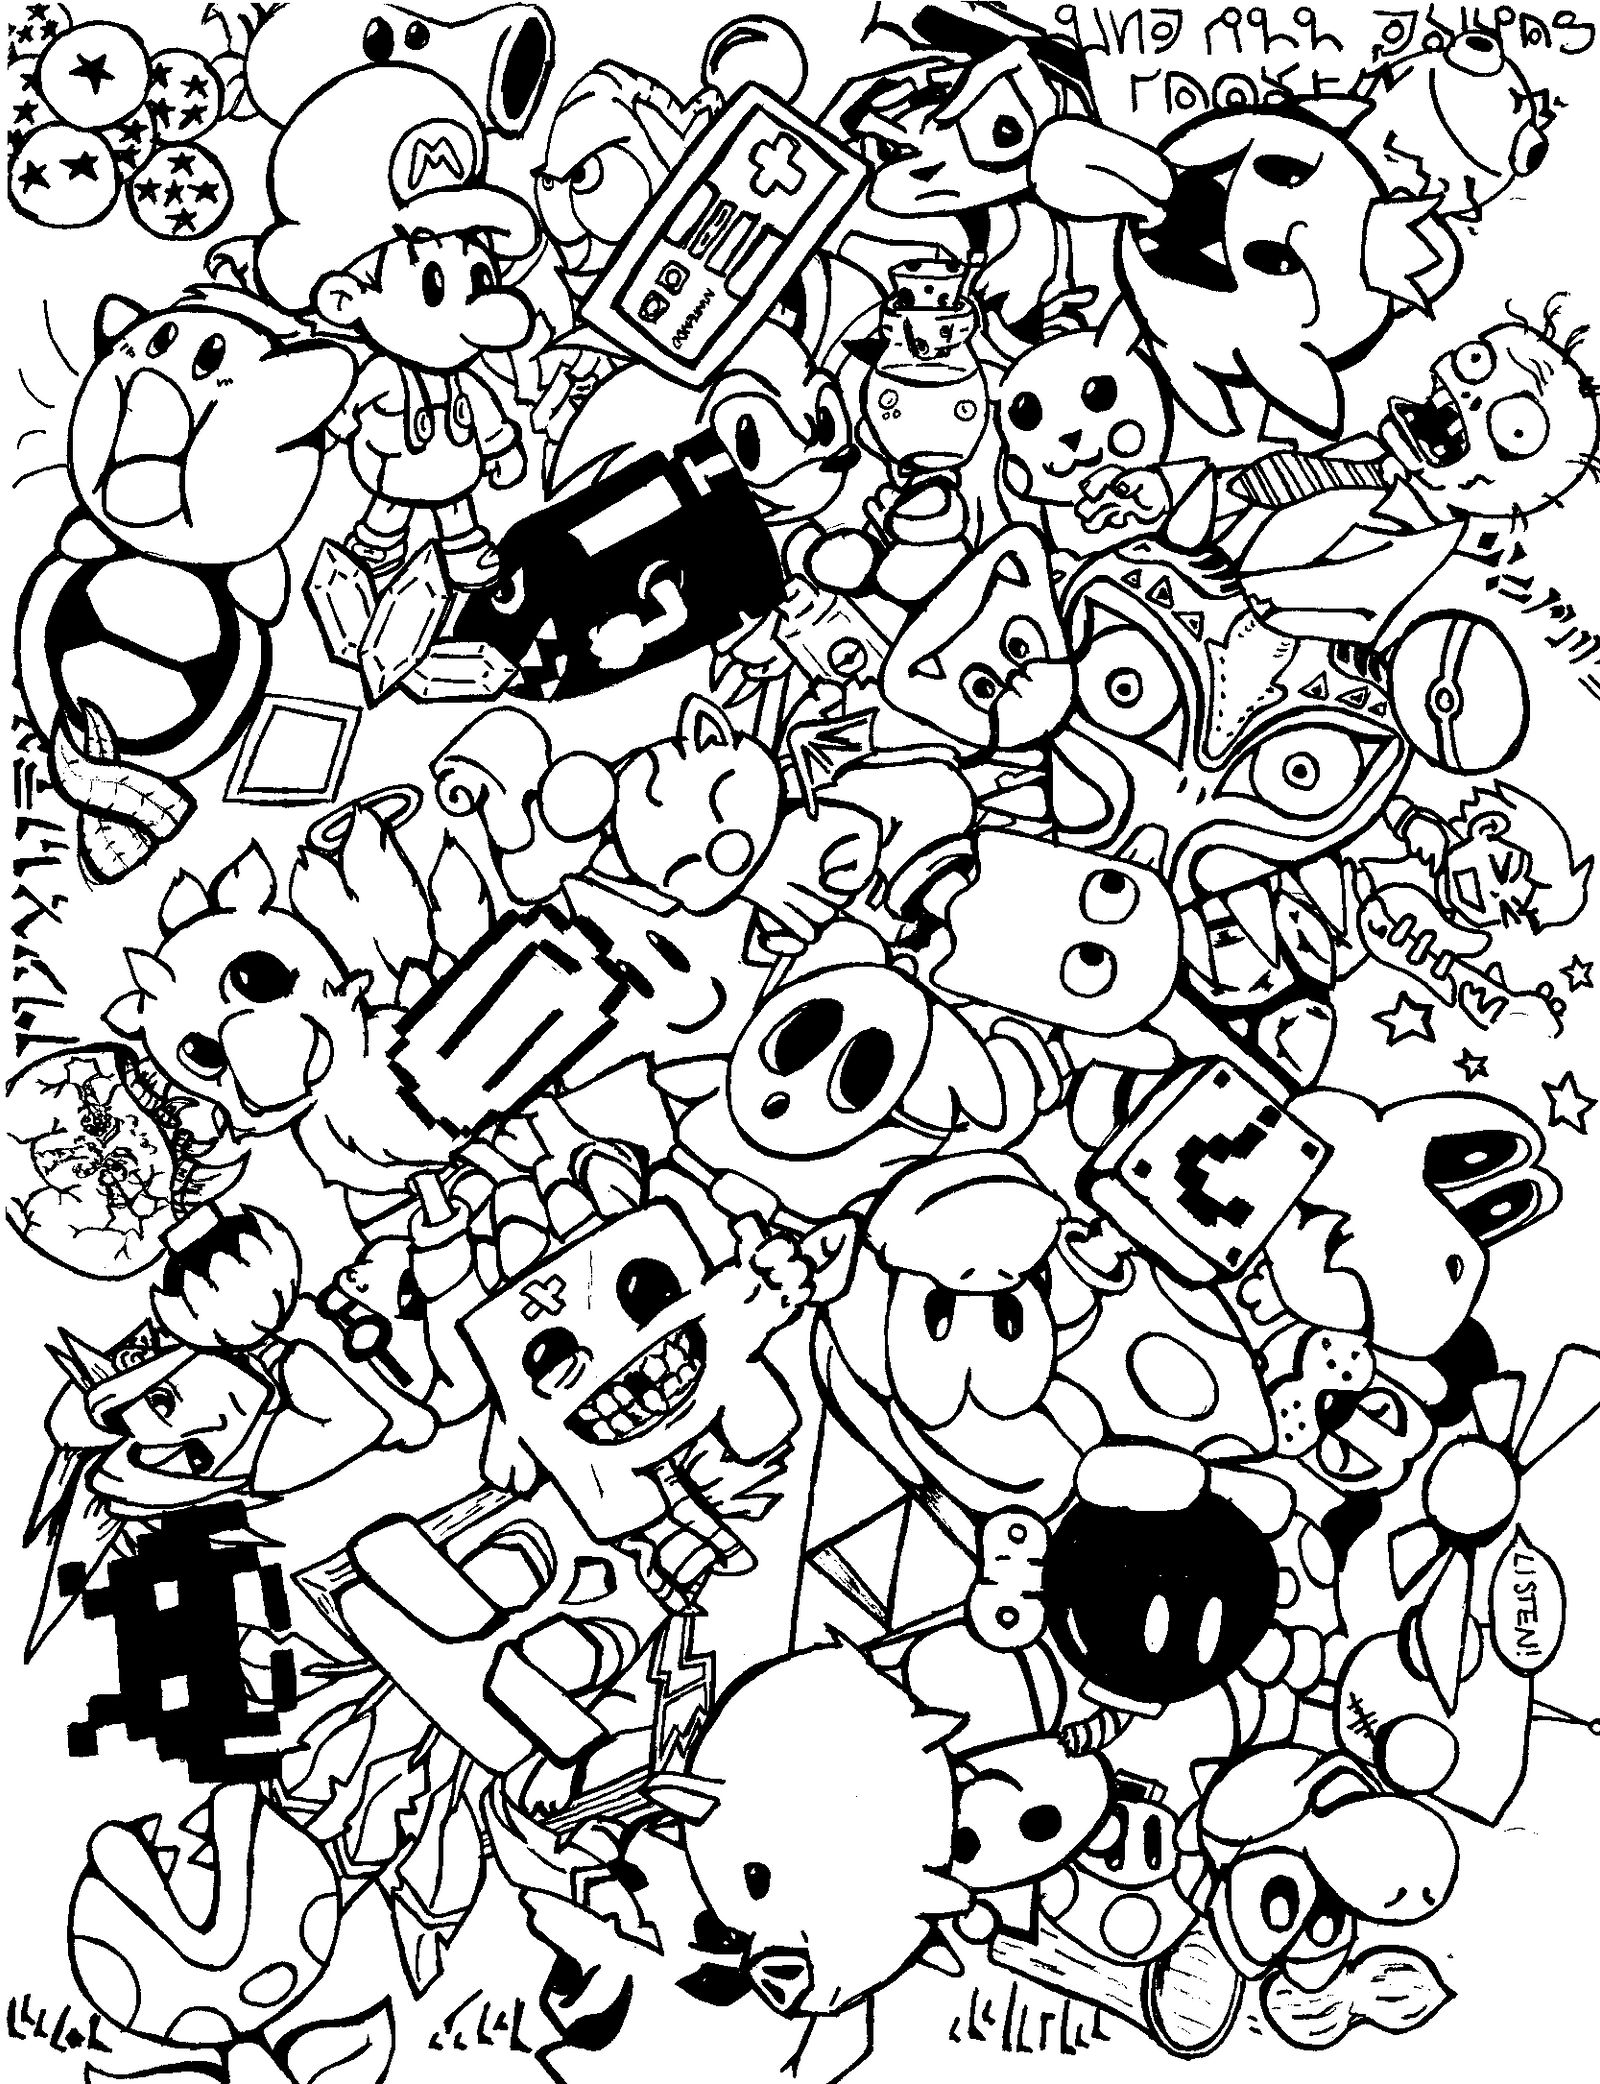 Doodle Art (Drawing paper, 8×10) : : Toys & Games